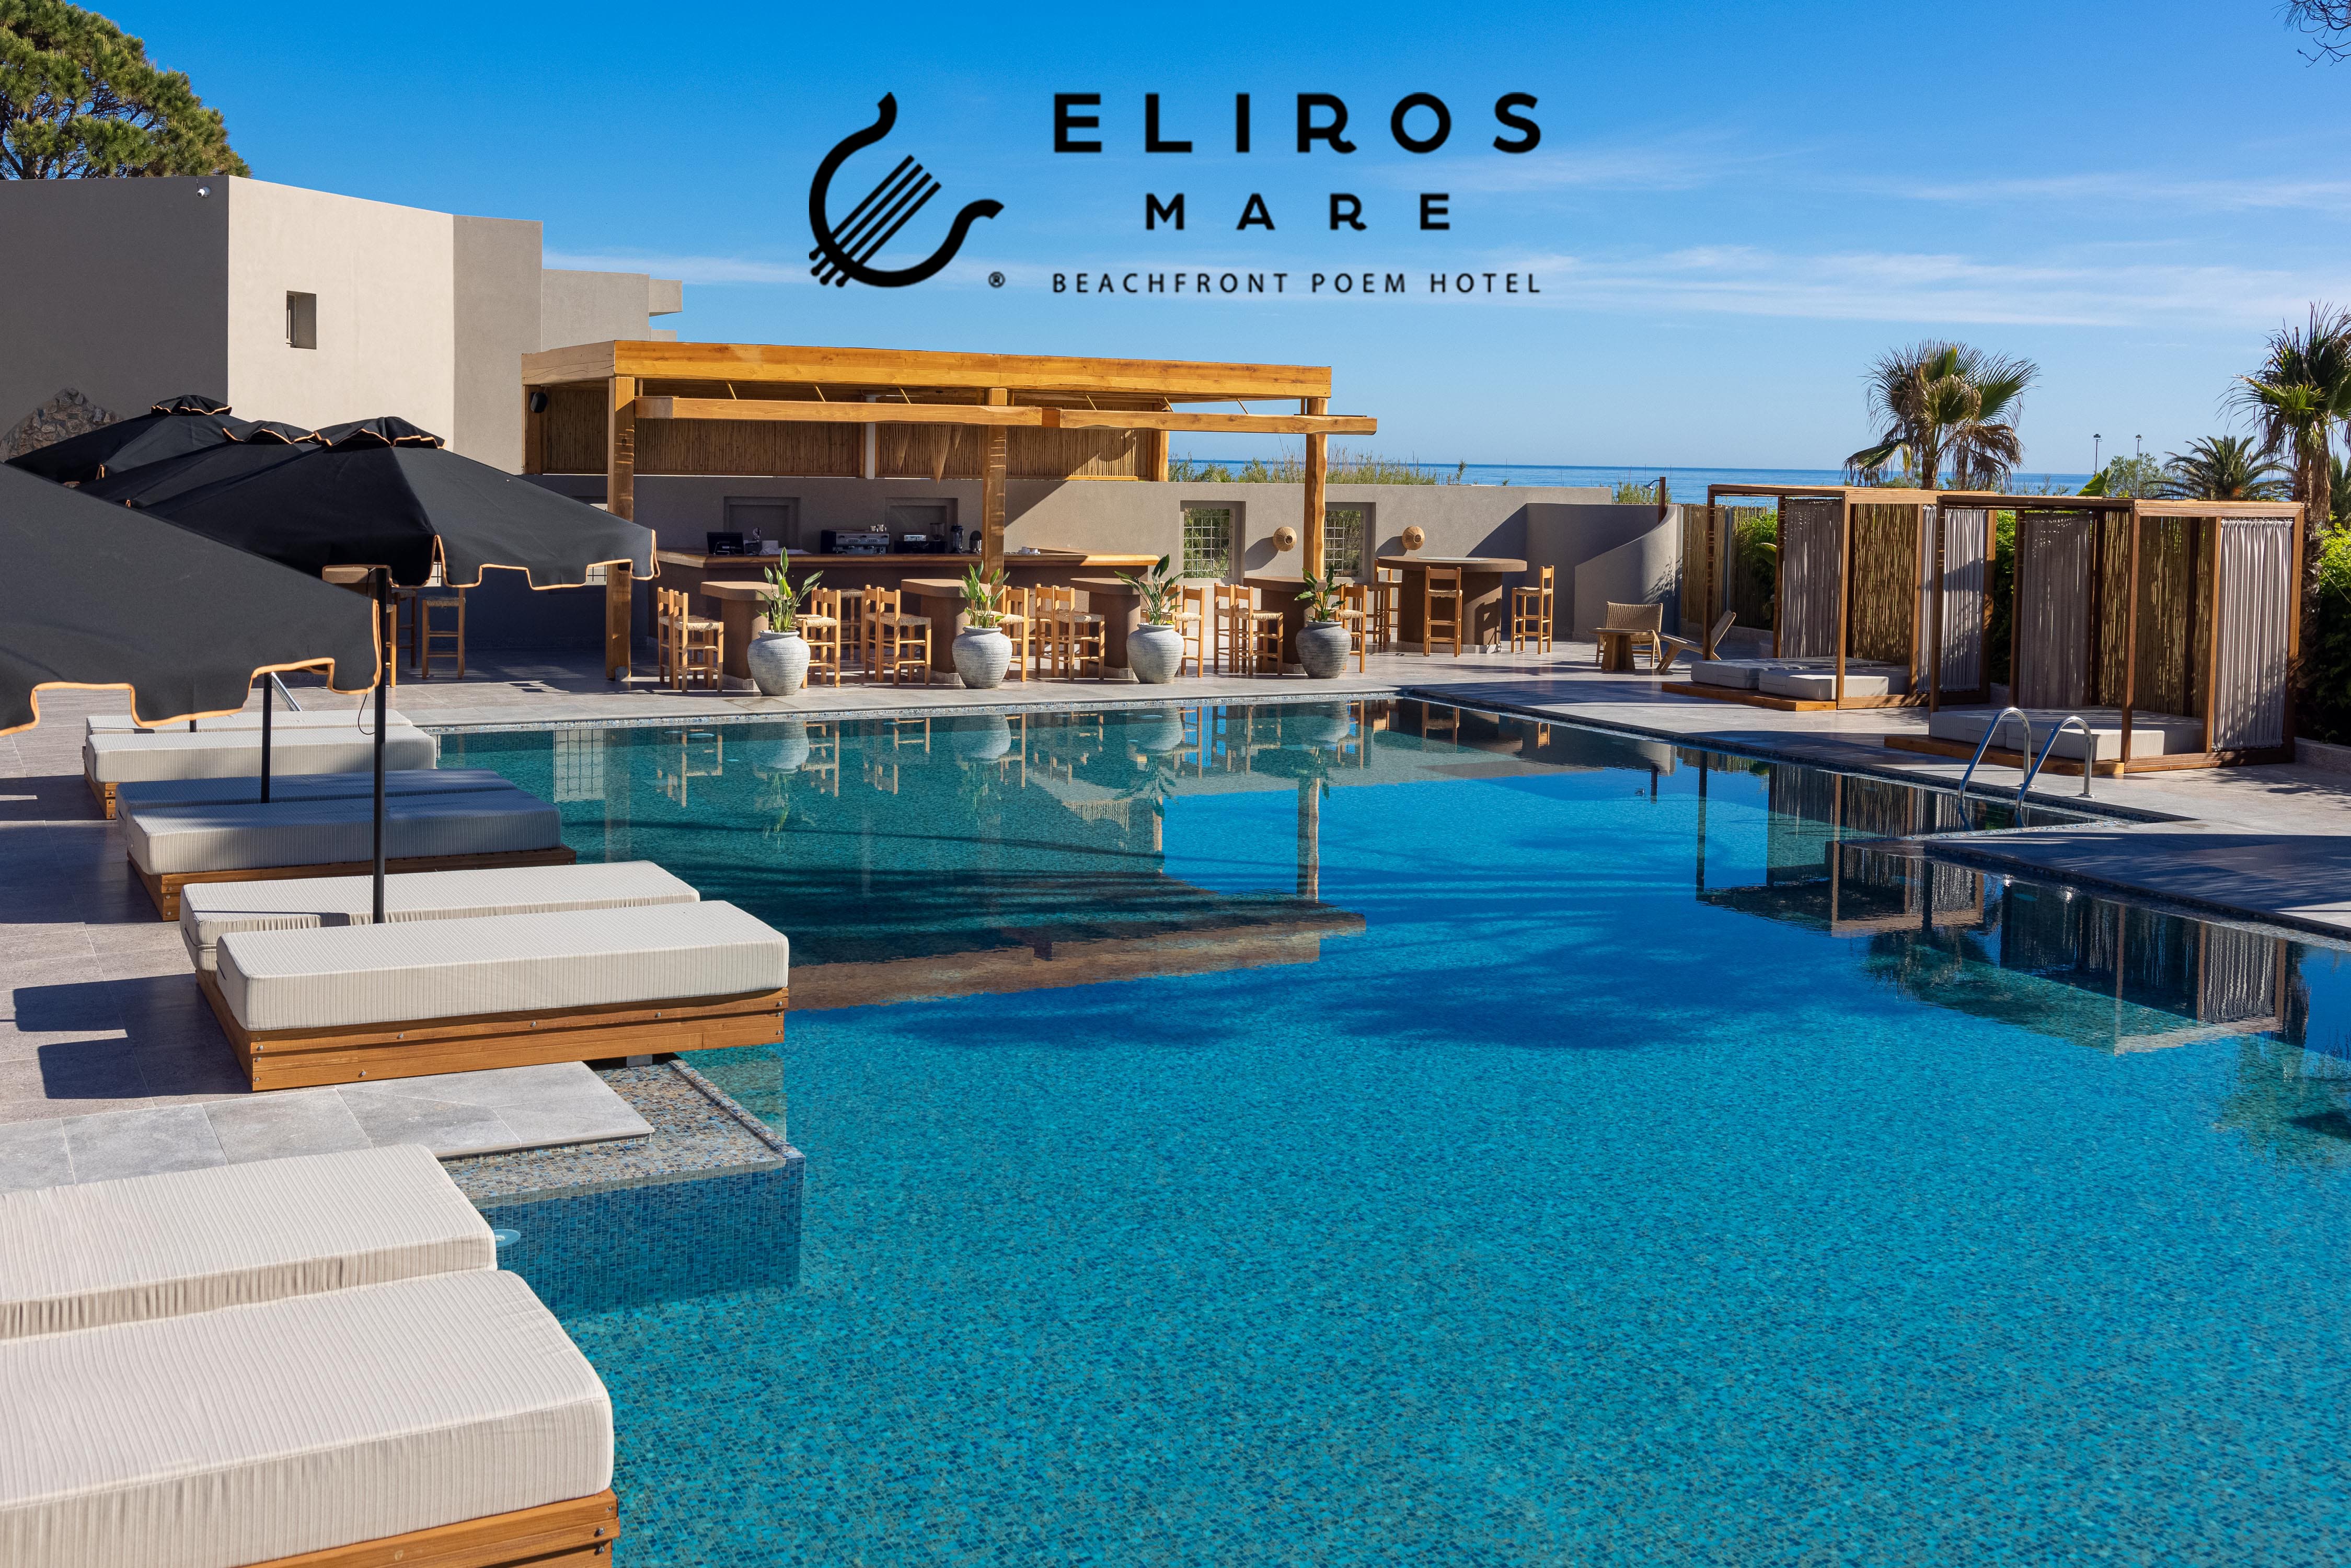 A Fully Renovation & Rebranding Project Has Been Occurred At Eliros Mare Hotel!